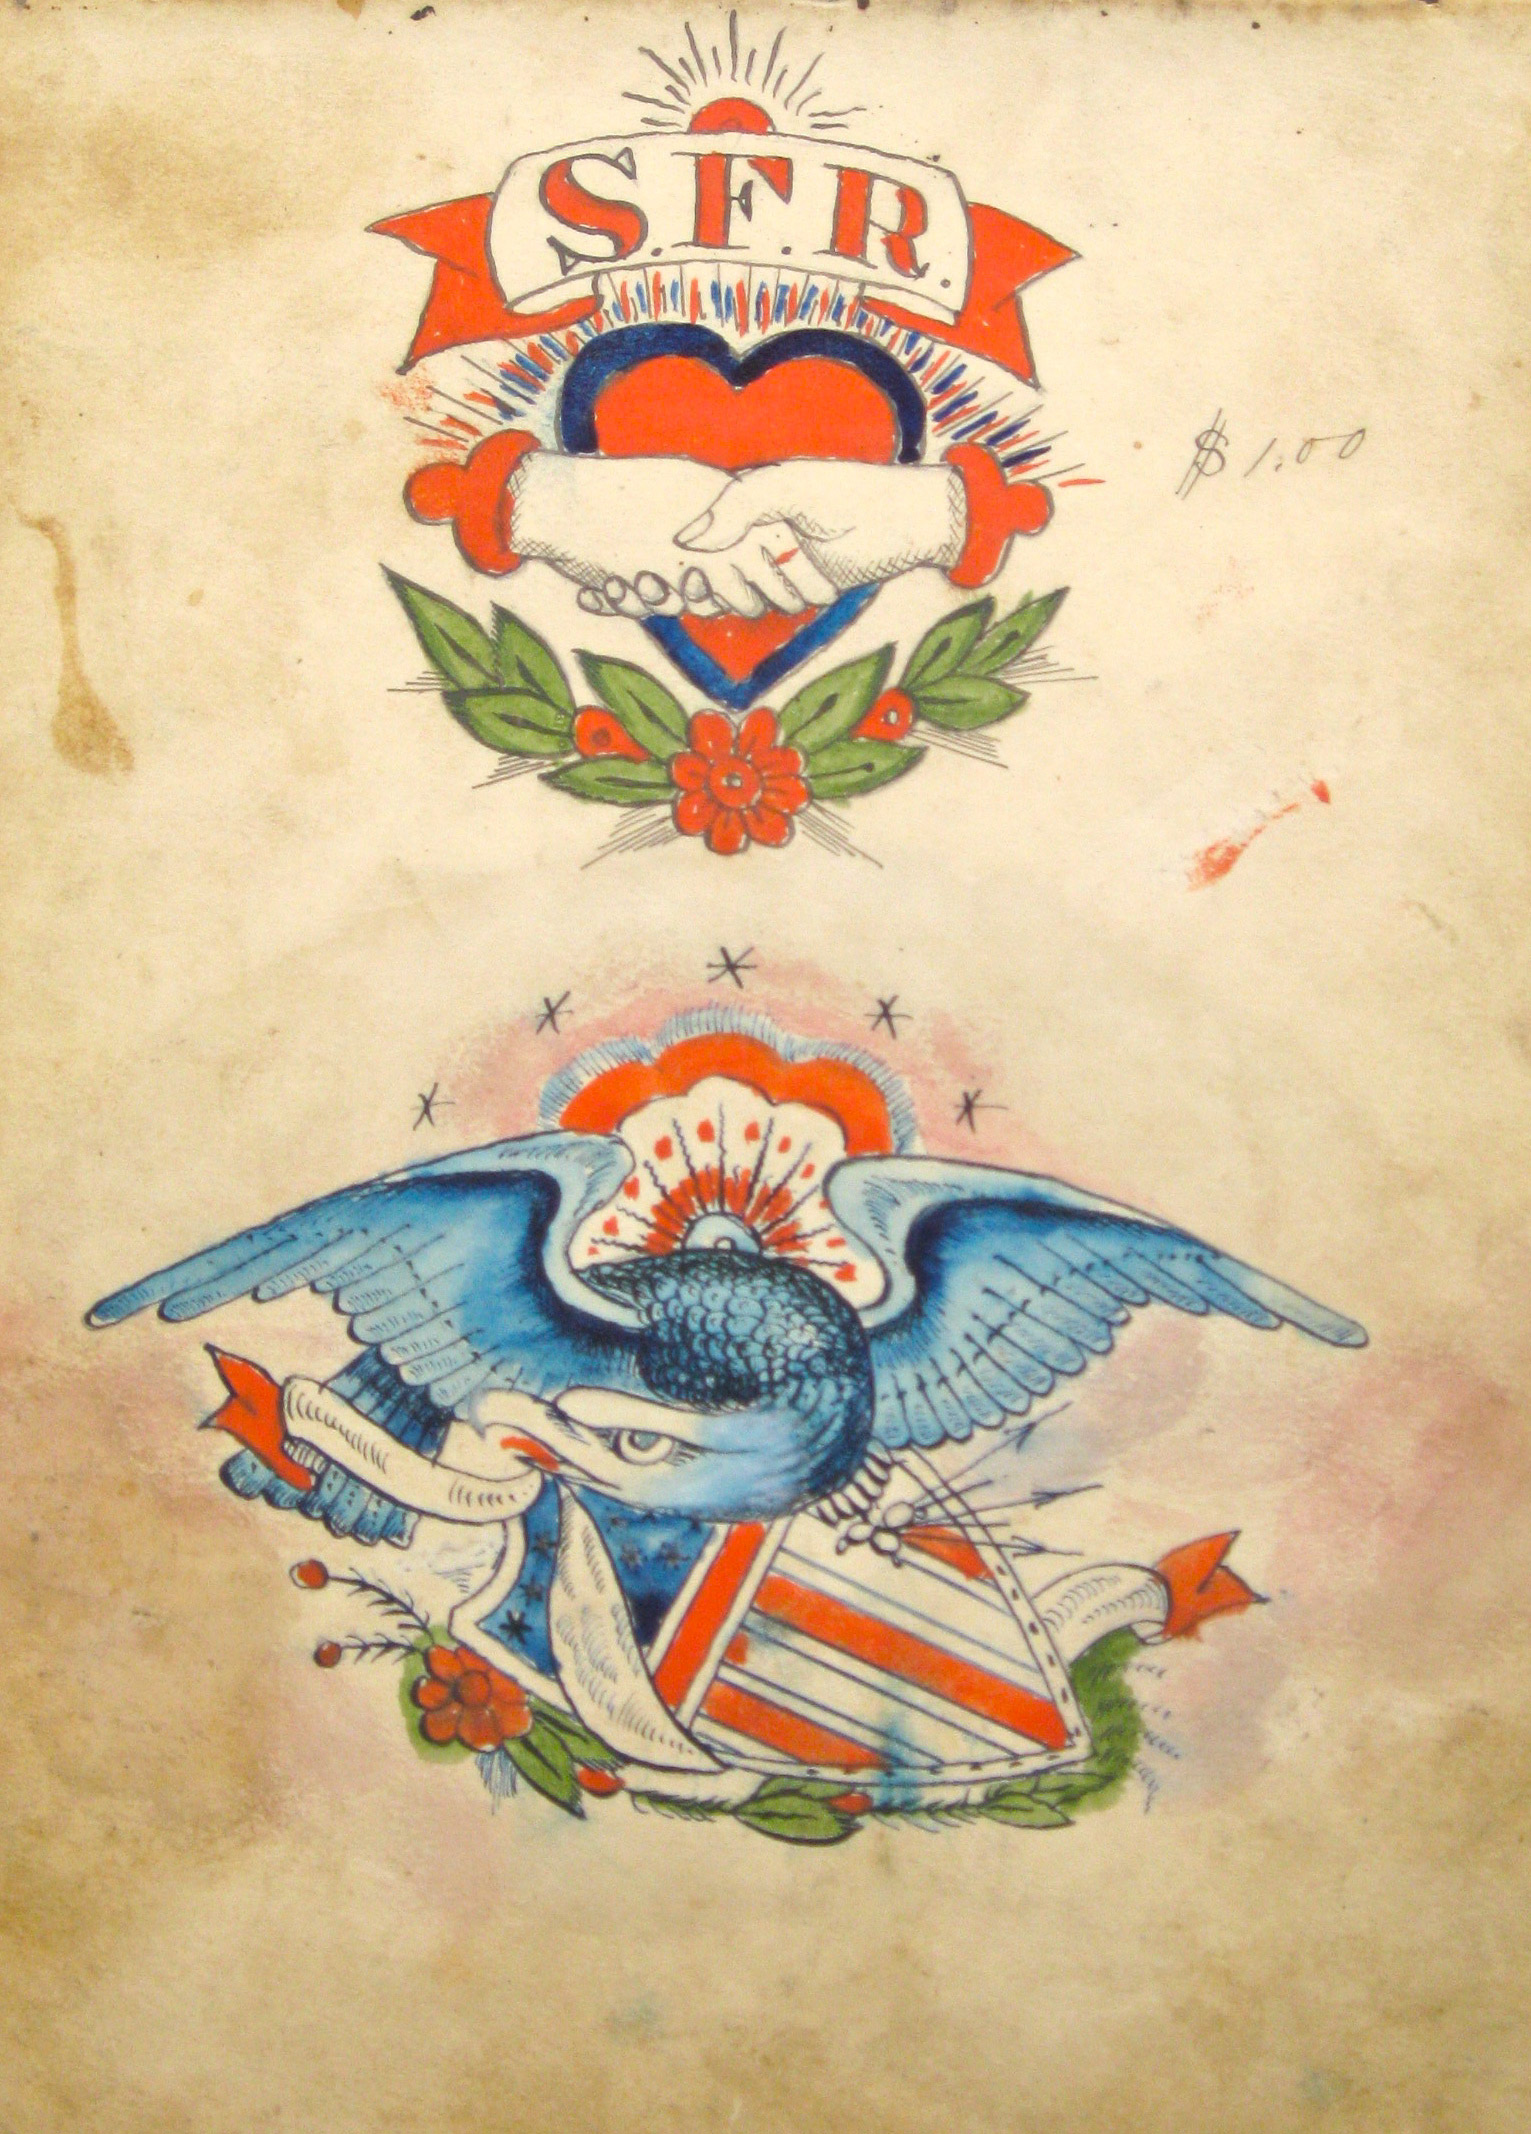 Eagle and shield, ca. 1875–1905 by Samuel O’Reilly.